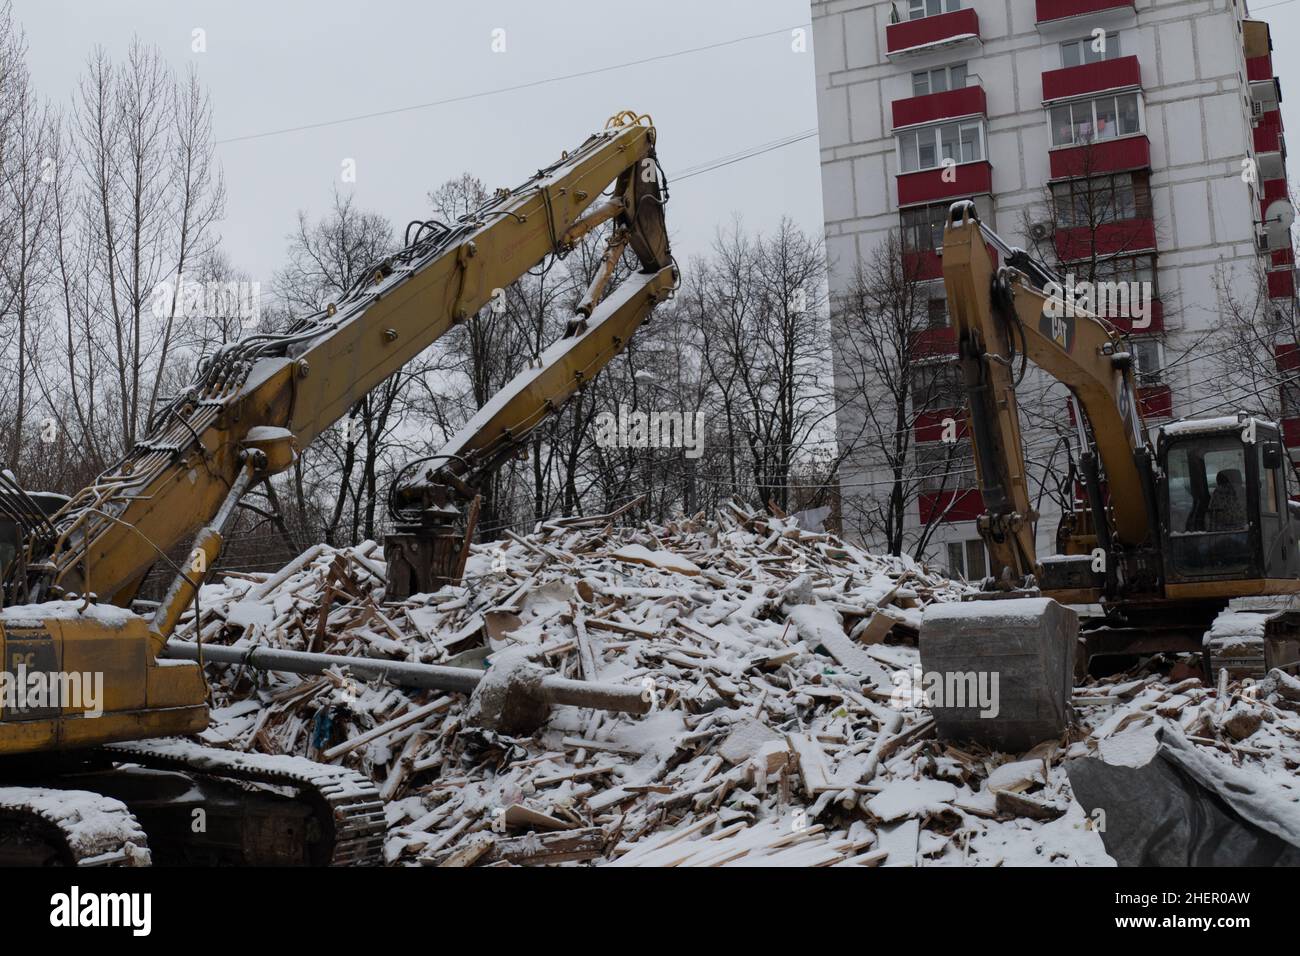 destroyed multi-storey residential building in the city 22 Stock Photo